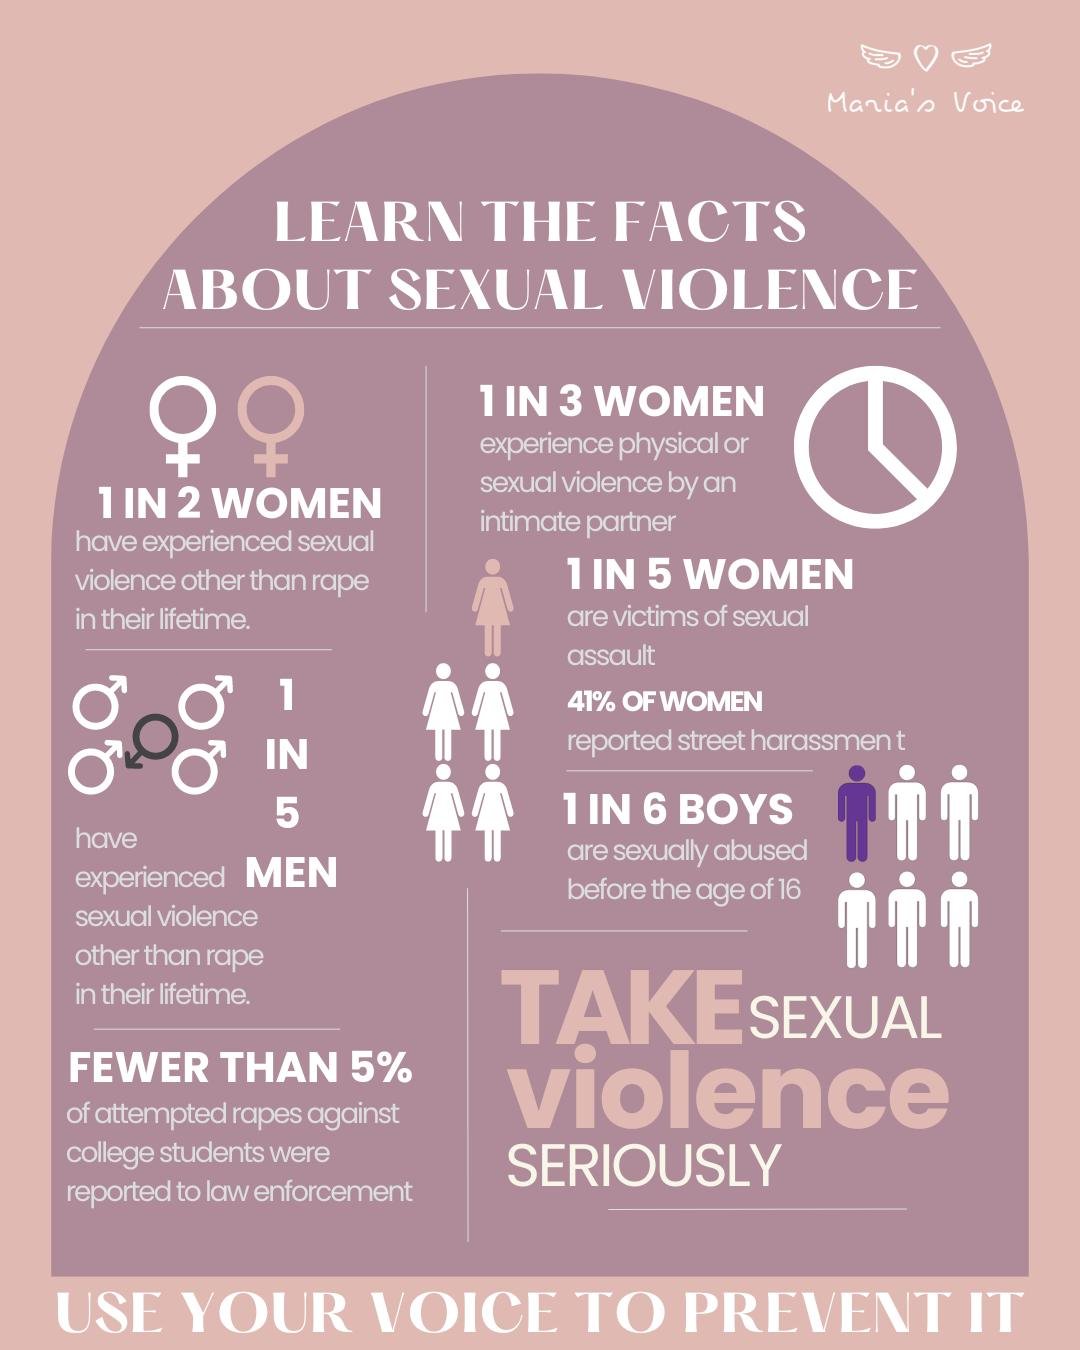 Learn the facts! 
April is Sexual Assault Awareness Month. Did you know that 1 in 2 women and 1 in 5 men experience some form of sexual violence in their lifetime? Let's break the silence, challenge harmful norms, and support survivors. Knowledge is 